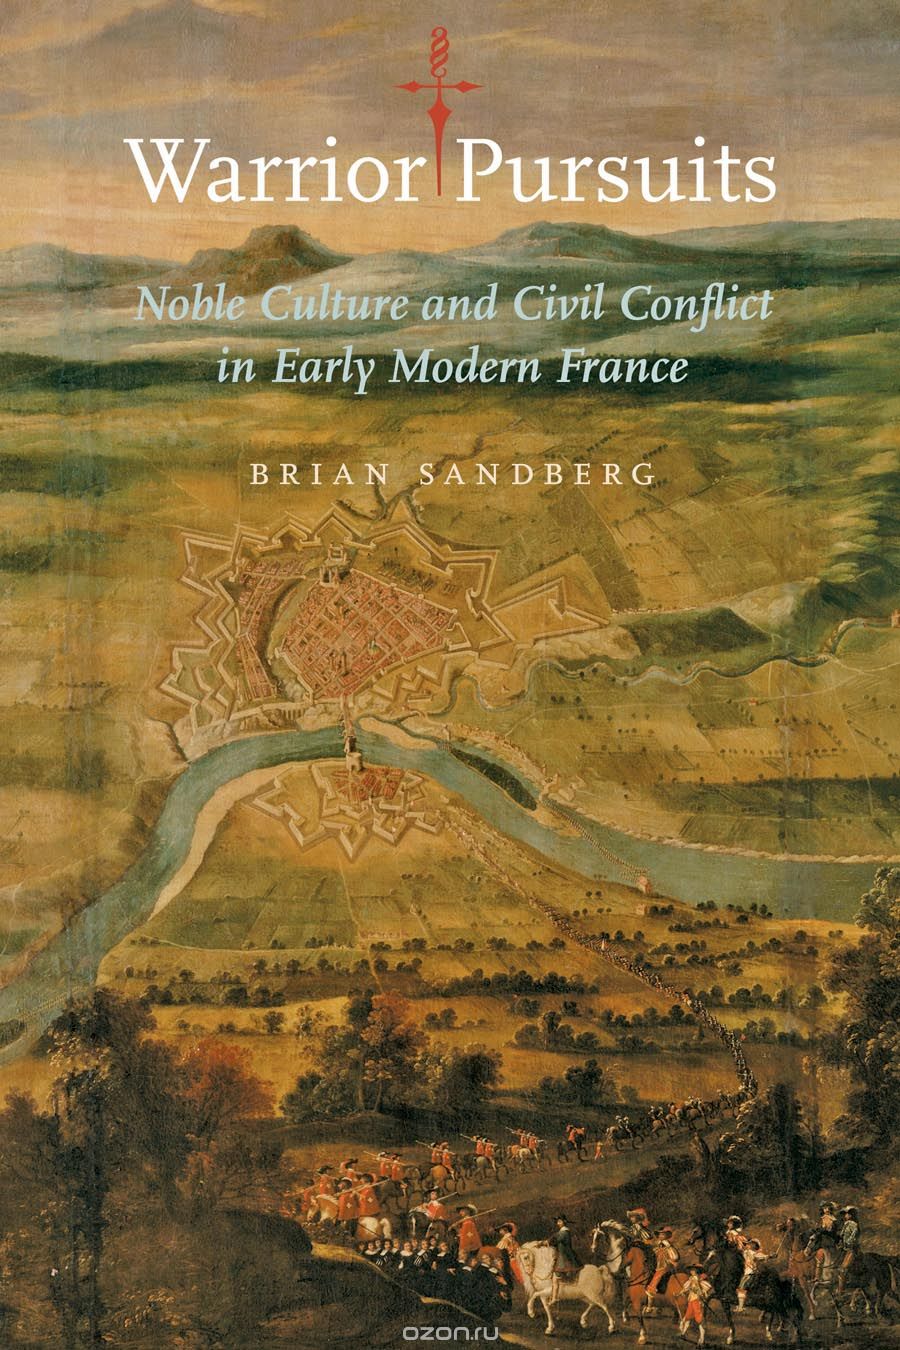 Скачать книгу "Warrior Pursuits – Noble Culture and Civil Conflict in Early Modern France"